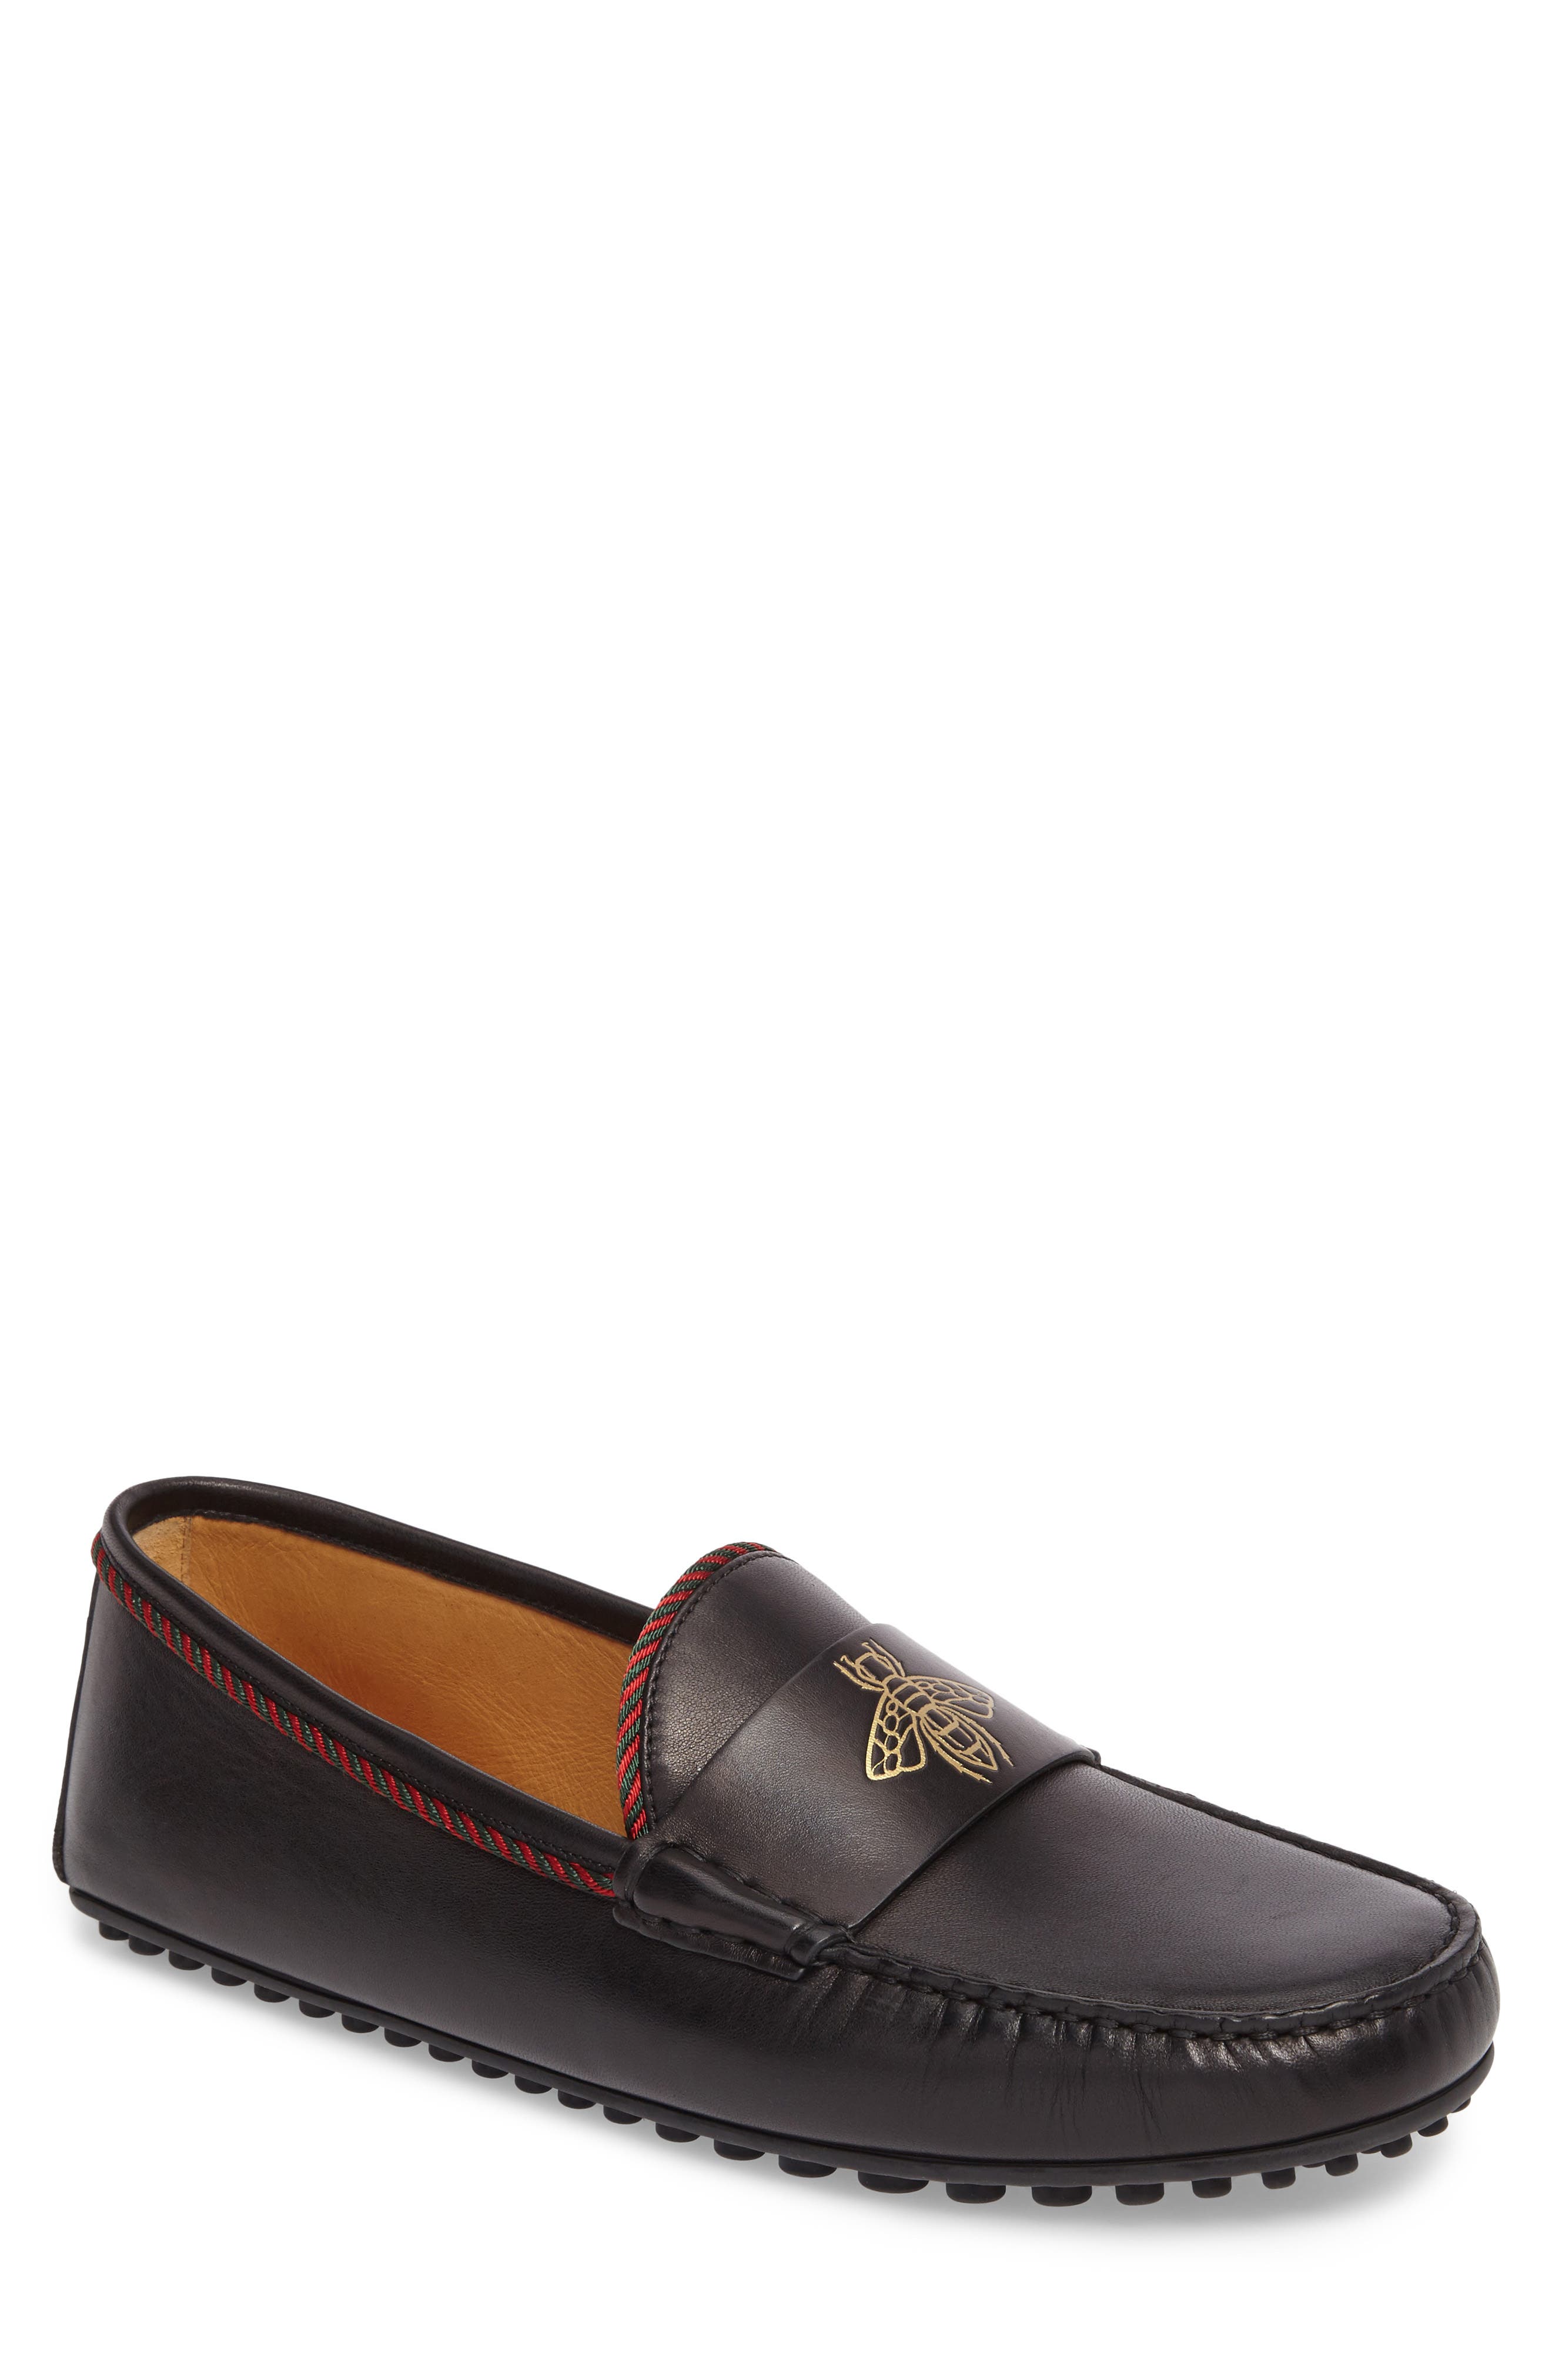 gucci bee shoes mens